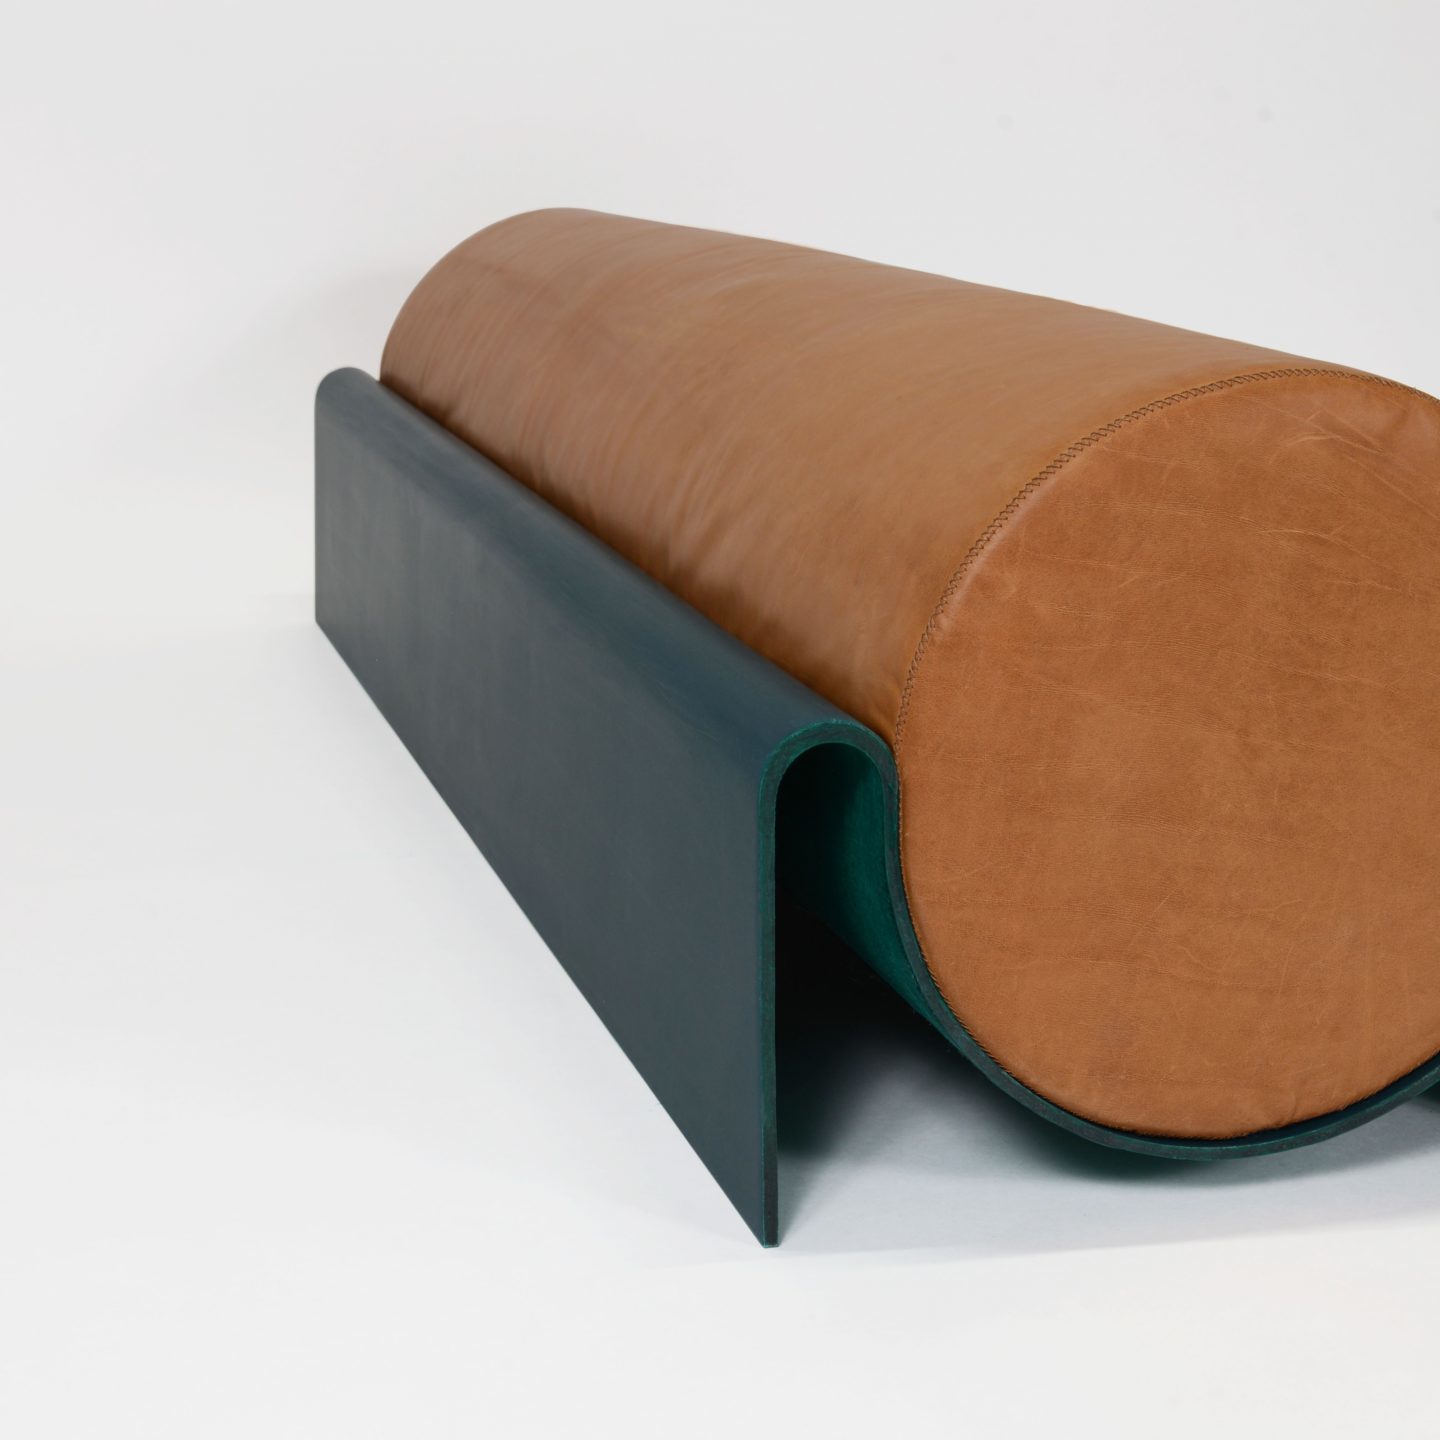 Bench in fiberglass with a cylindrical leather cushion designed by Asa Pingree